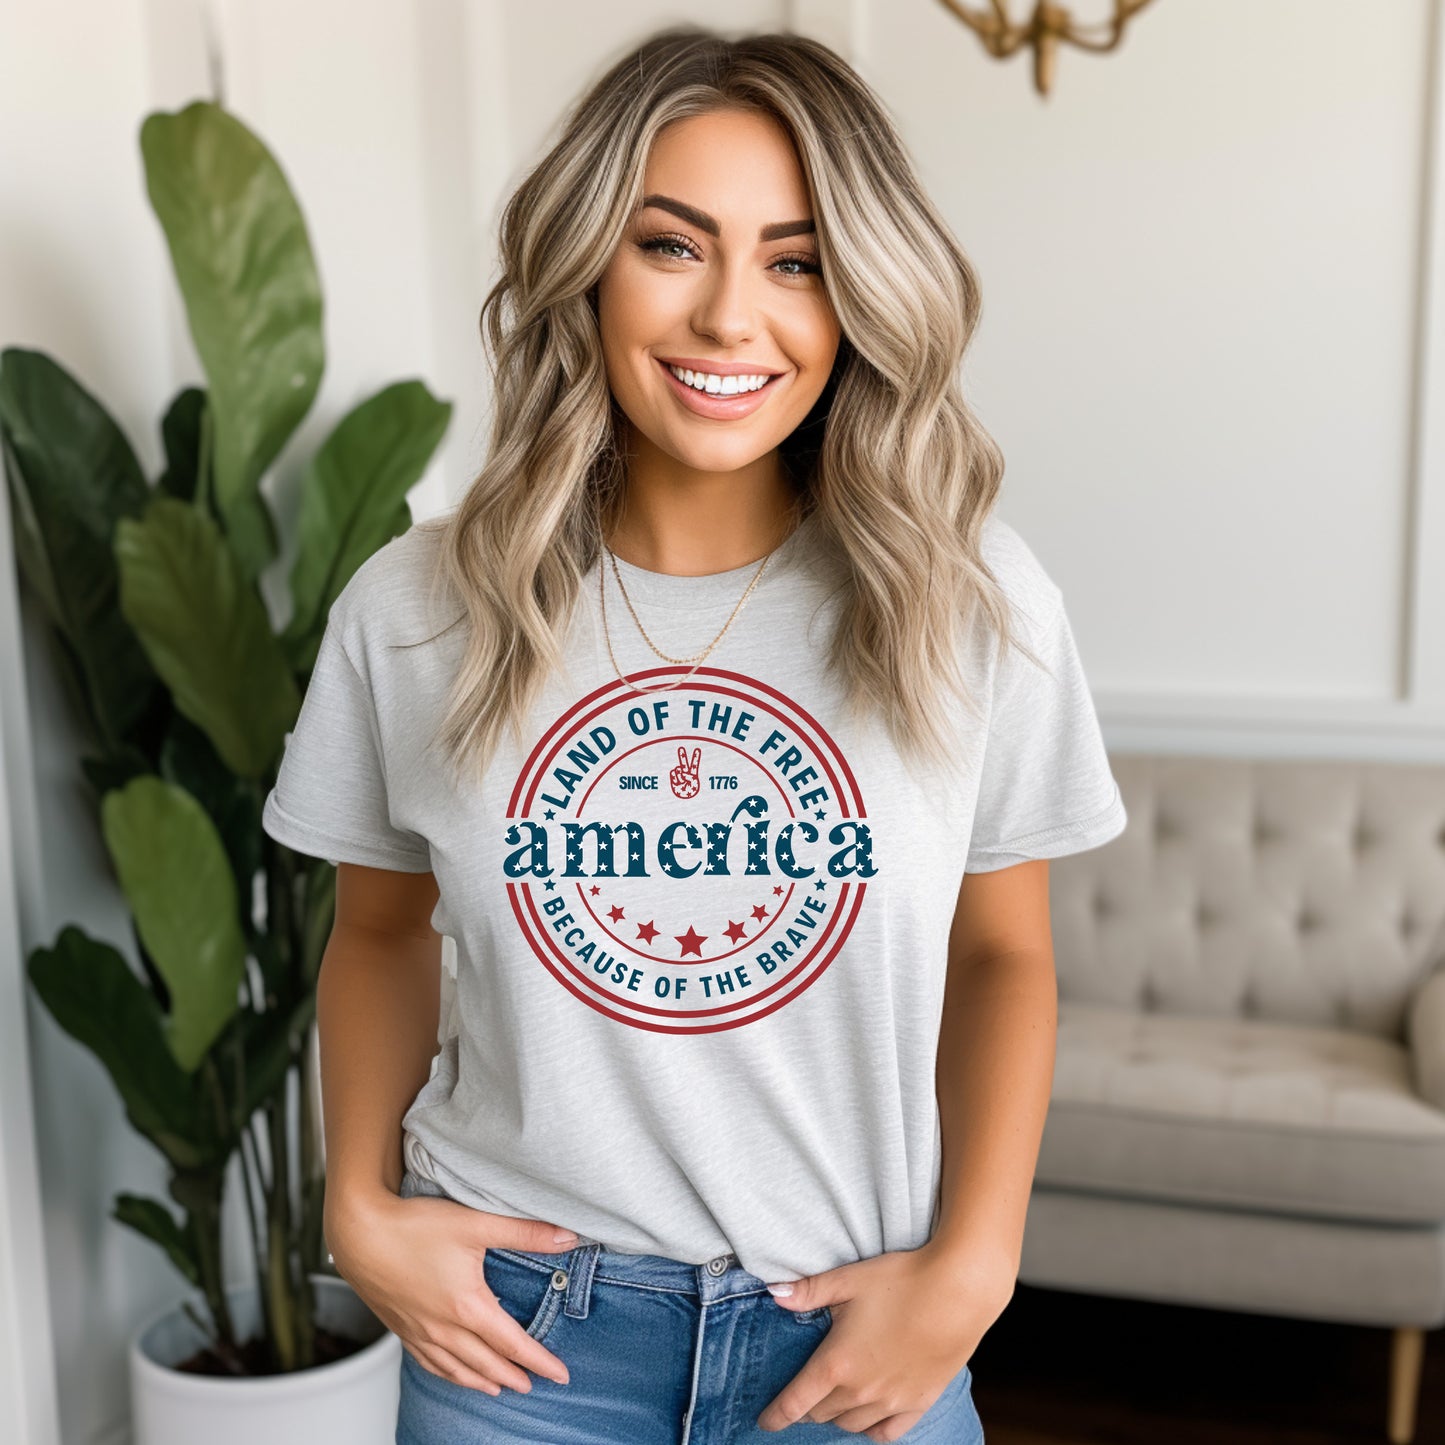 America: Land of The Free Because Of The Brave T-Shirt or Crew Sweatshirt